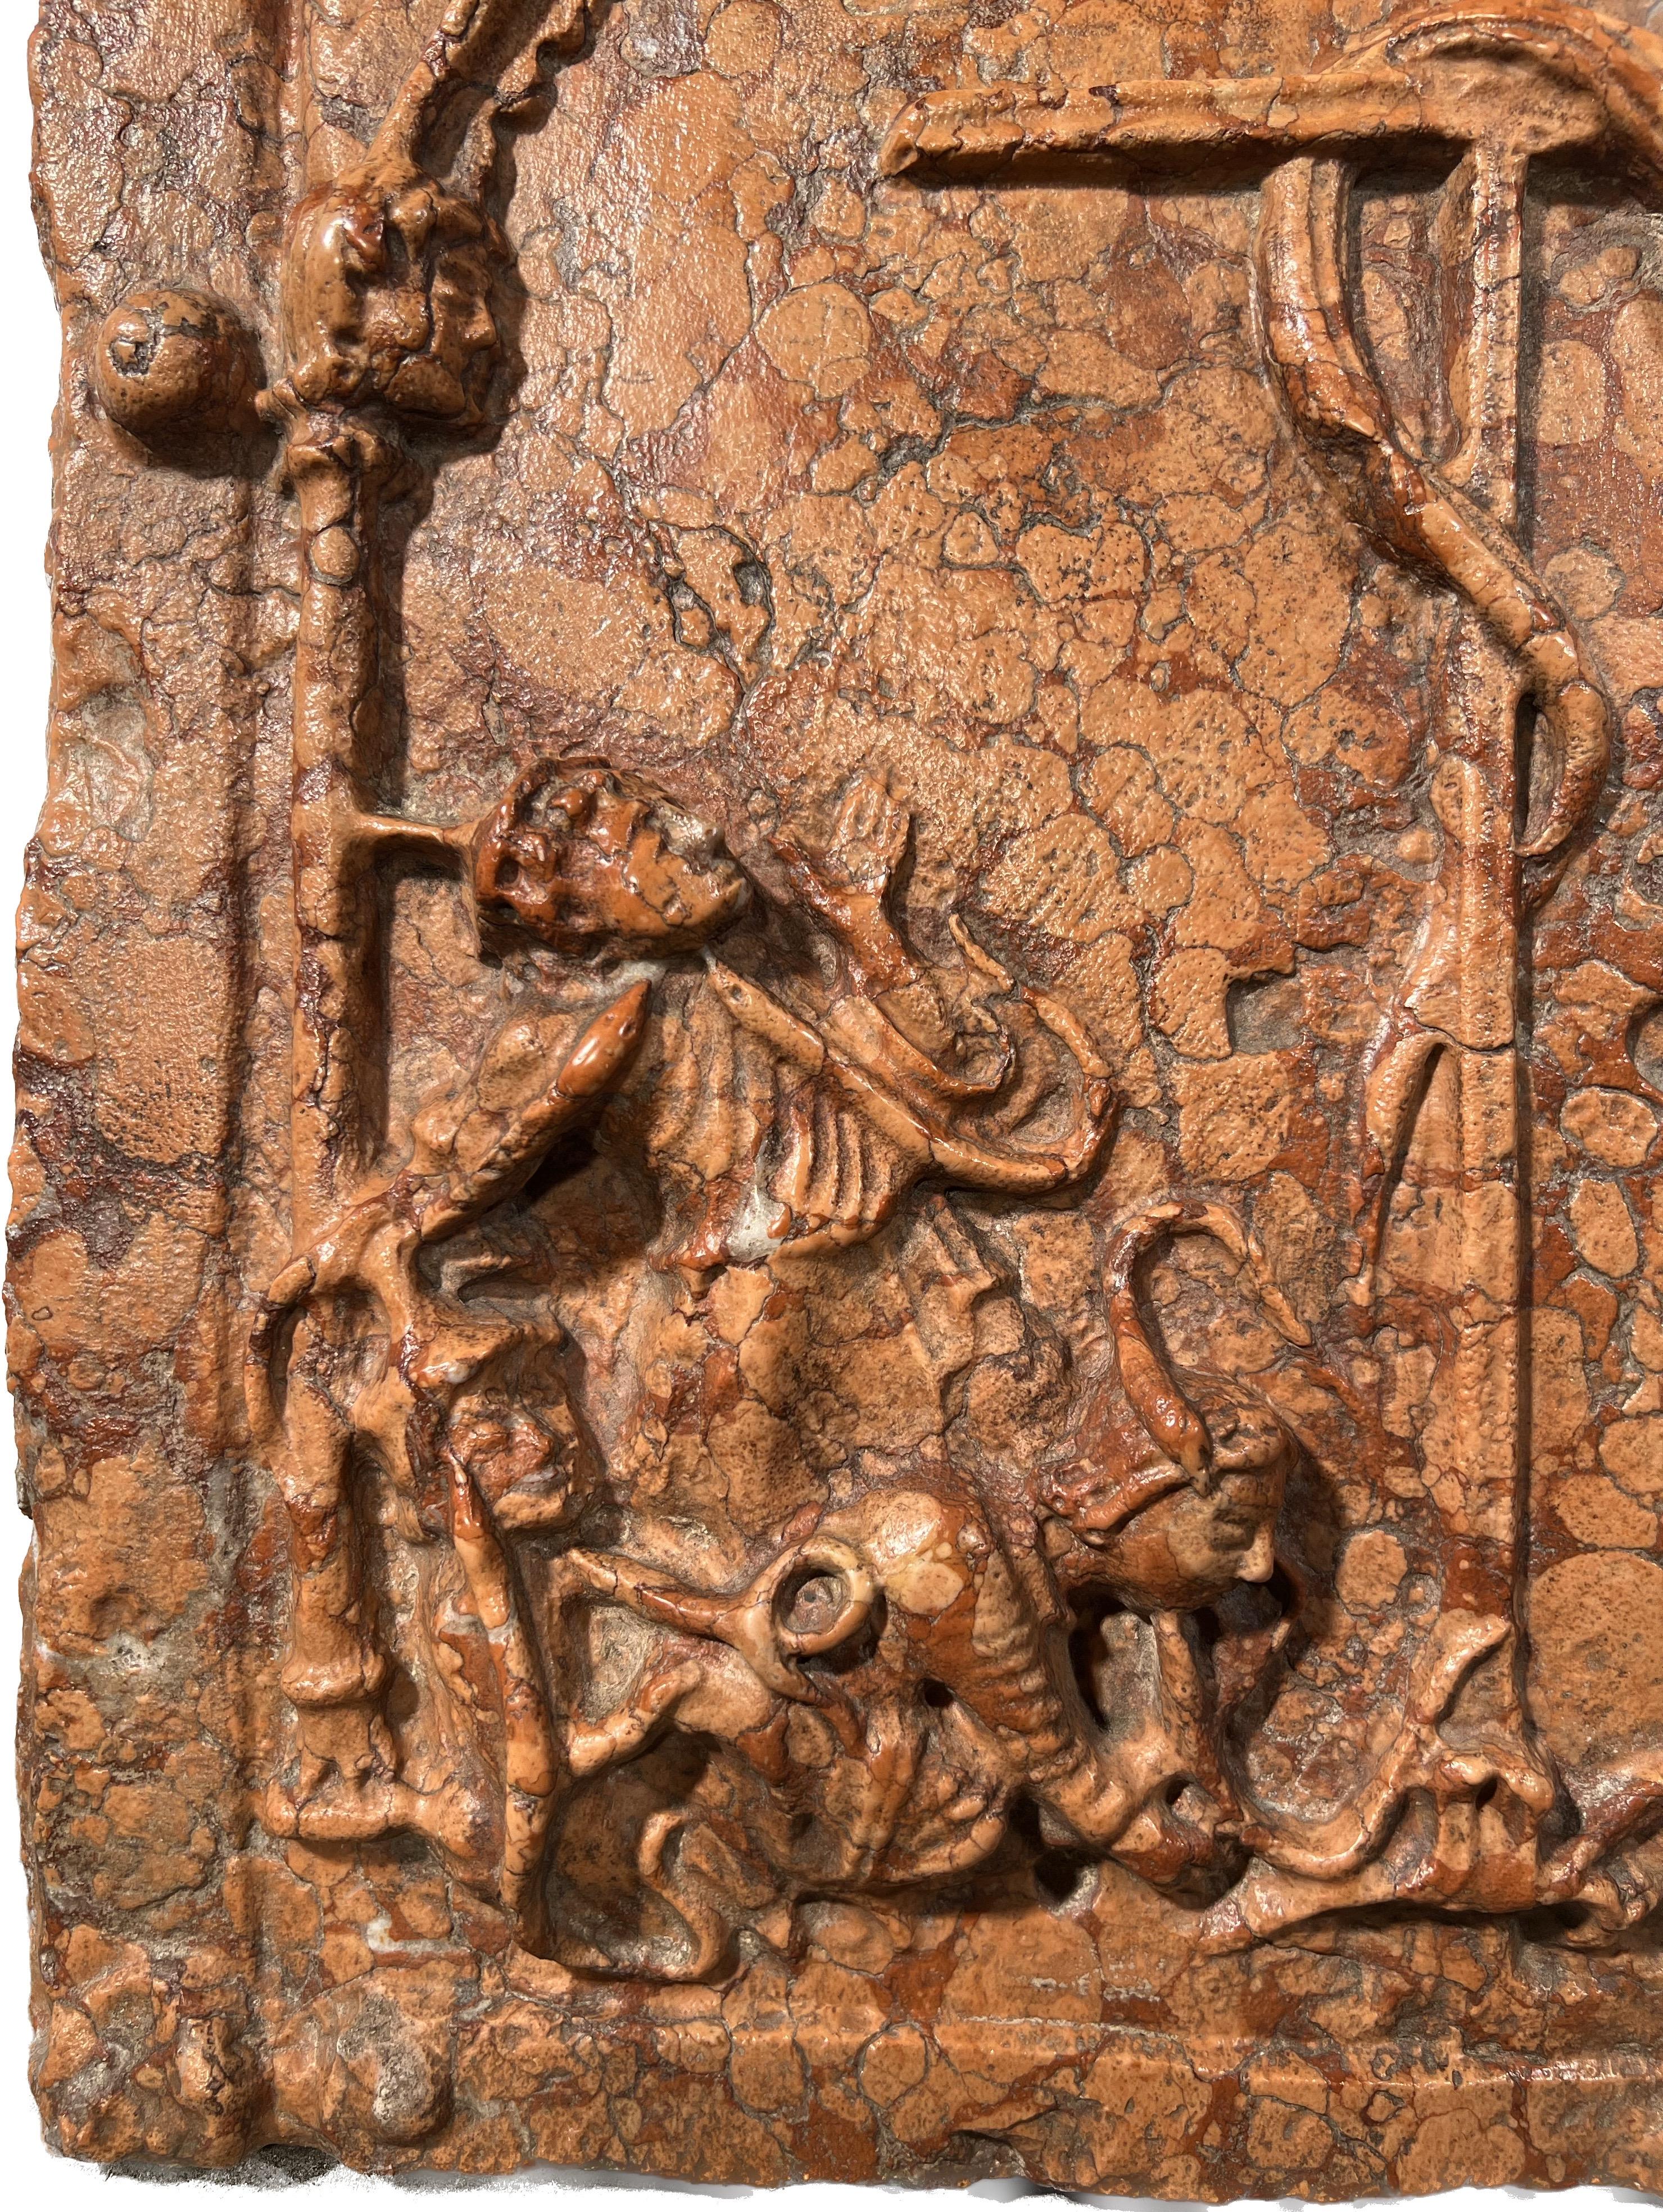 Moses and the bronze serpent depicted in low relief carving in Italian Marmo Ross di Verona.
Handcrafted replica of a Tau Cross XIII century artifact.
Brazen Serpent (Nehushtan), Judeo/Christian Old Testament:
In the biblical Books of Kings (2 Kings